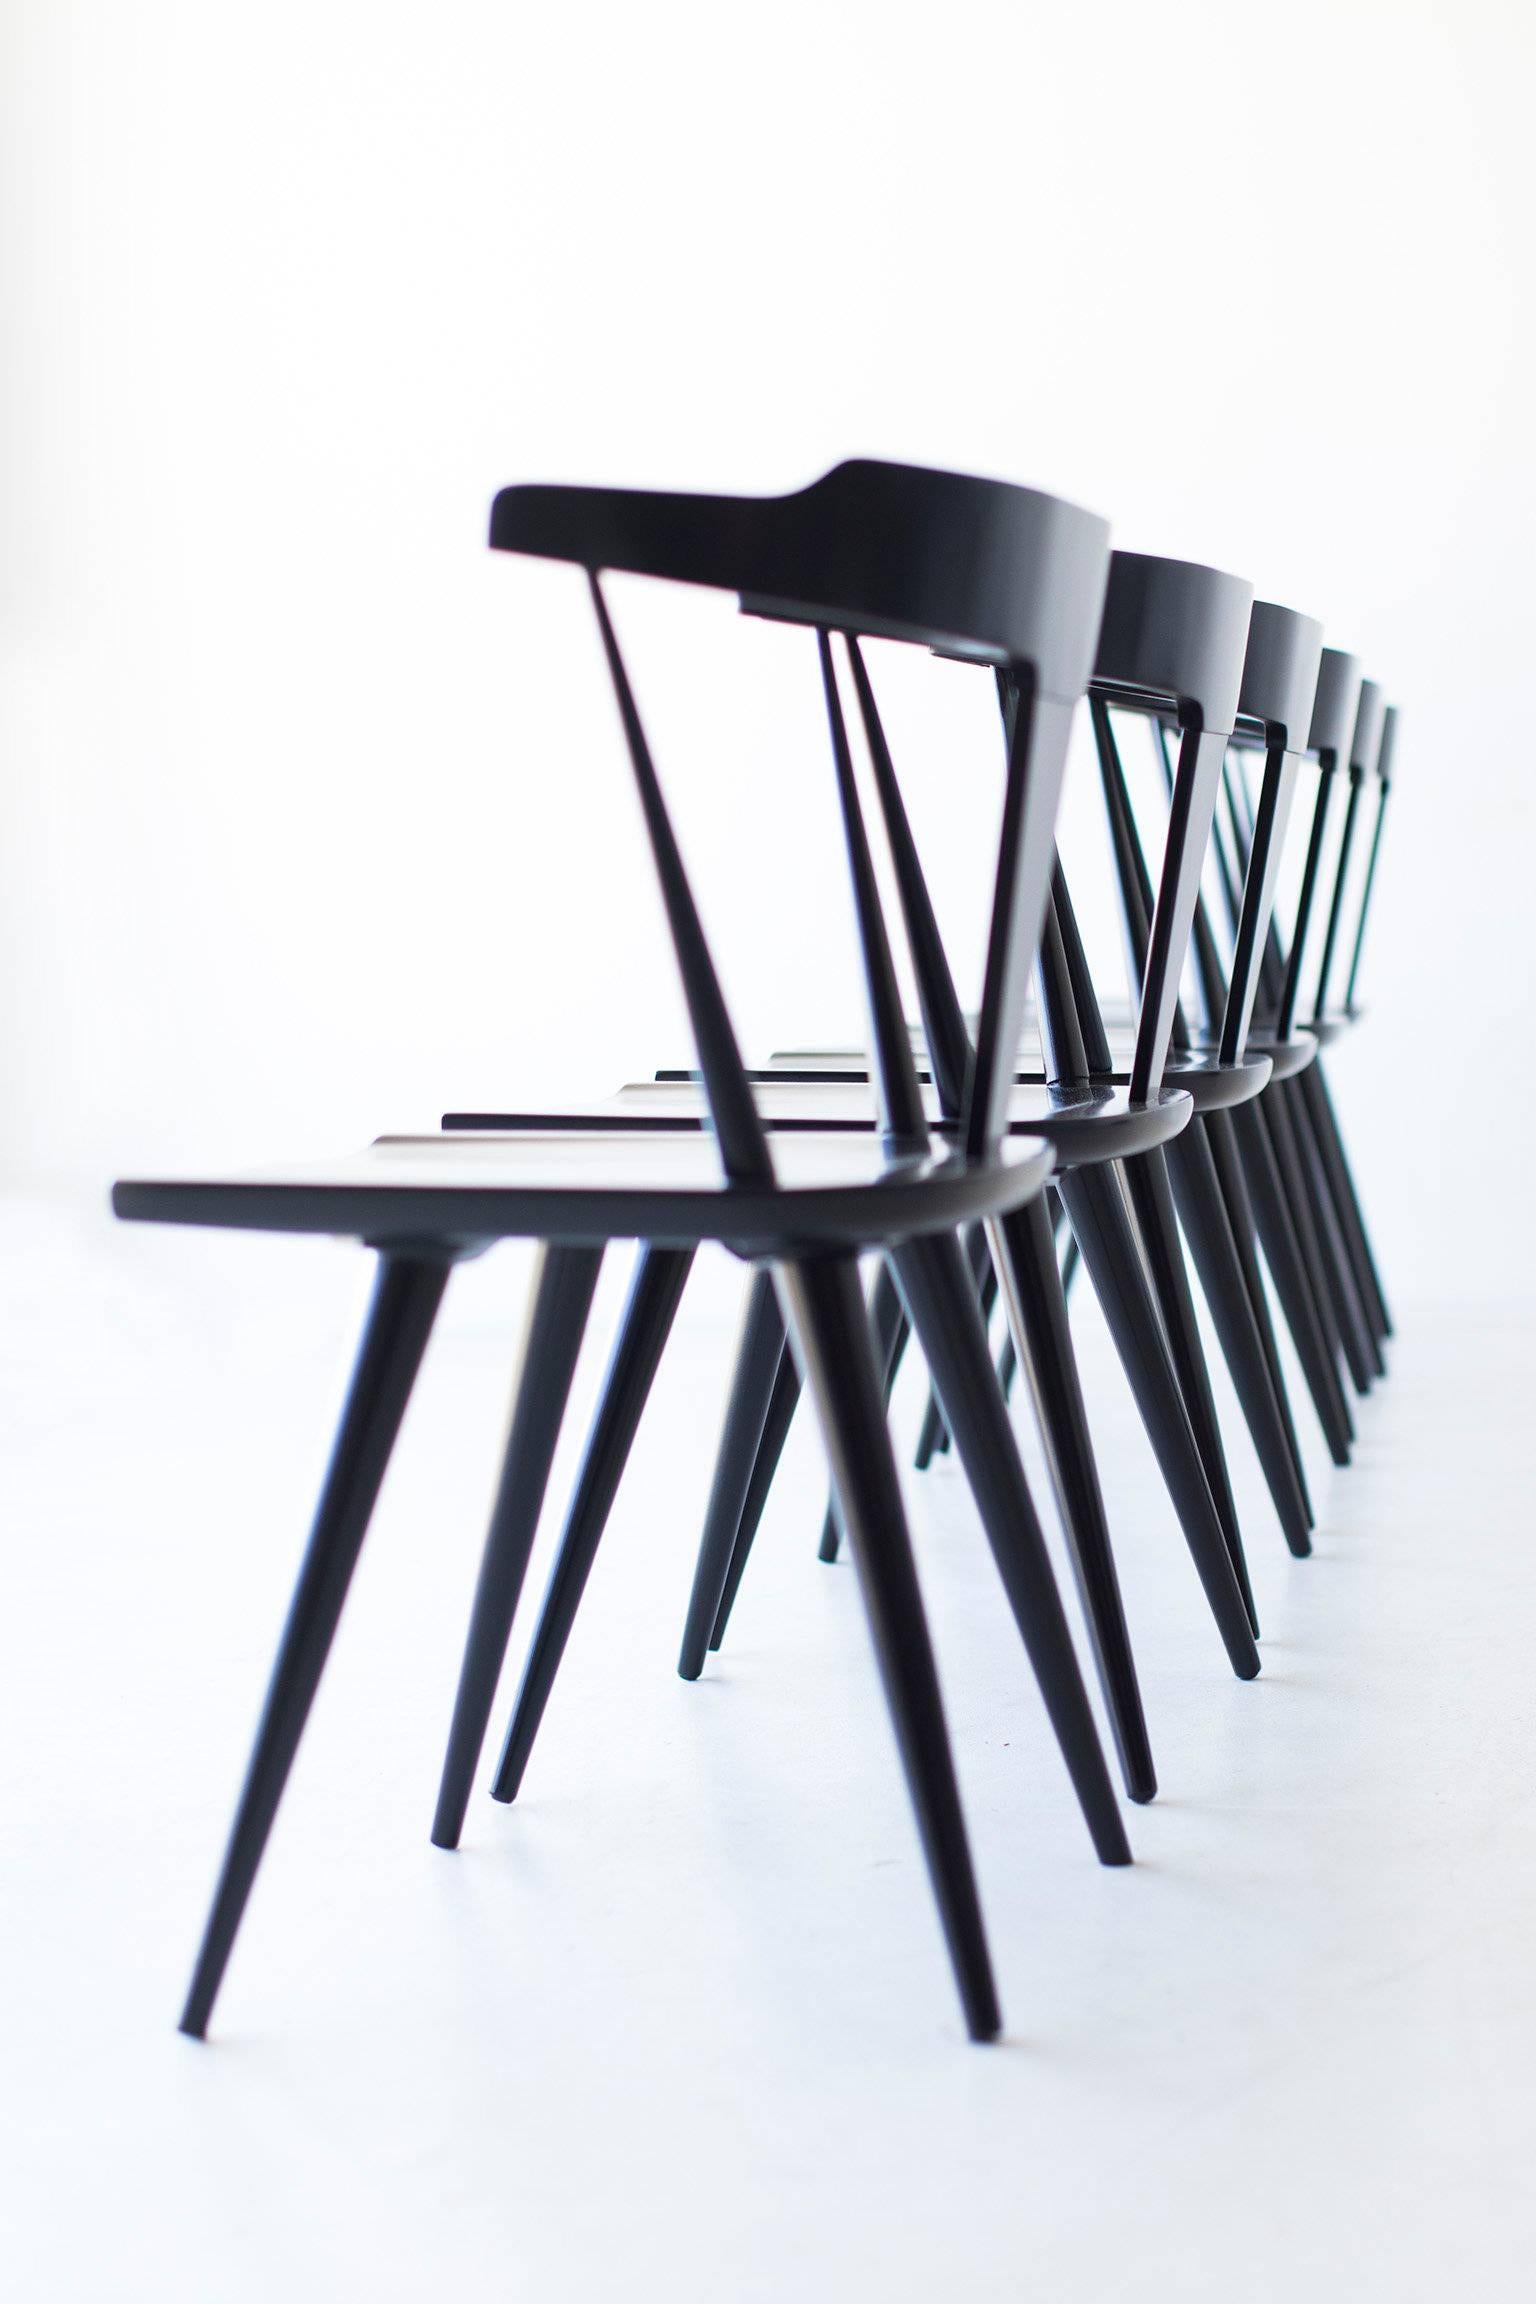 Designer: Paul McCobb. 

Manufacturer: Winchendon, Planner Group. 
Period or model: Mid-Century Modern. 
Specs: Maple, black lacquer. 

Condition: 

These Paul McCobb dining chairs for Winchendon, Planner Group are in excellent restored